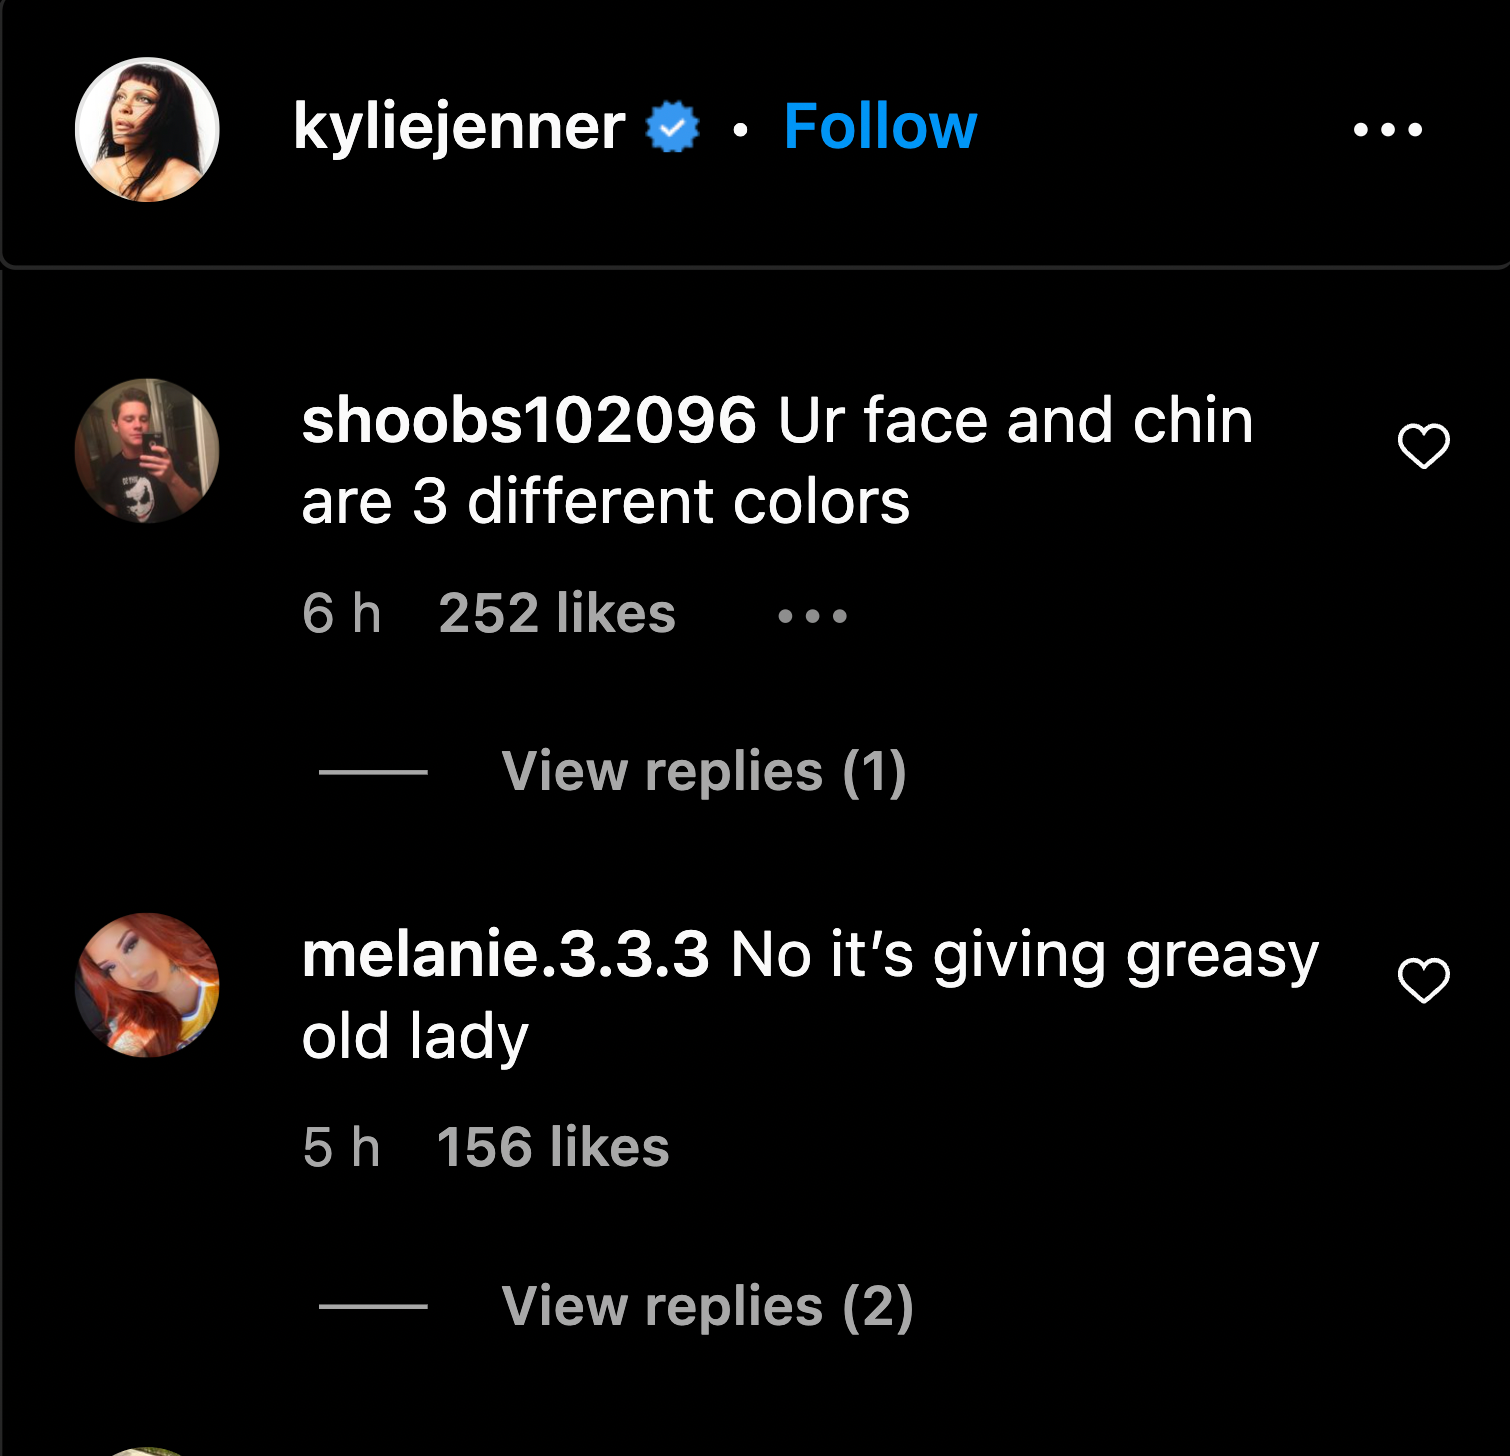 Comment section of Kylie Jenner's post on Instagram